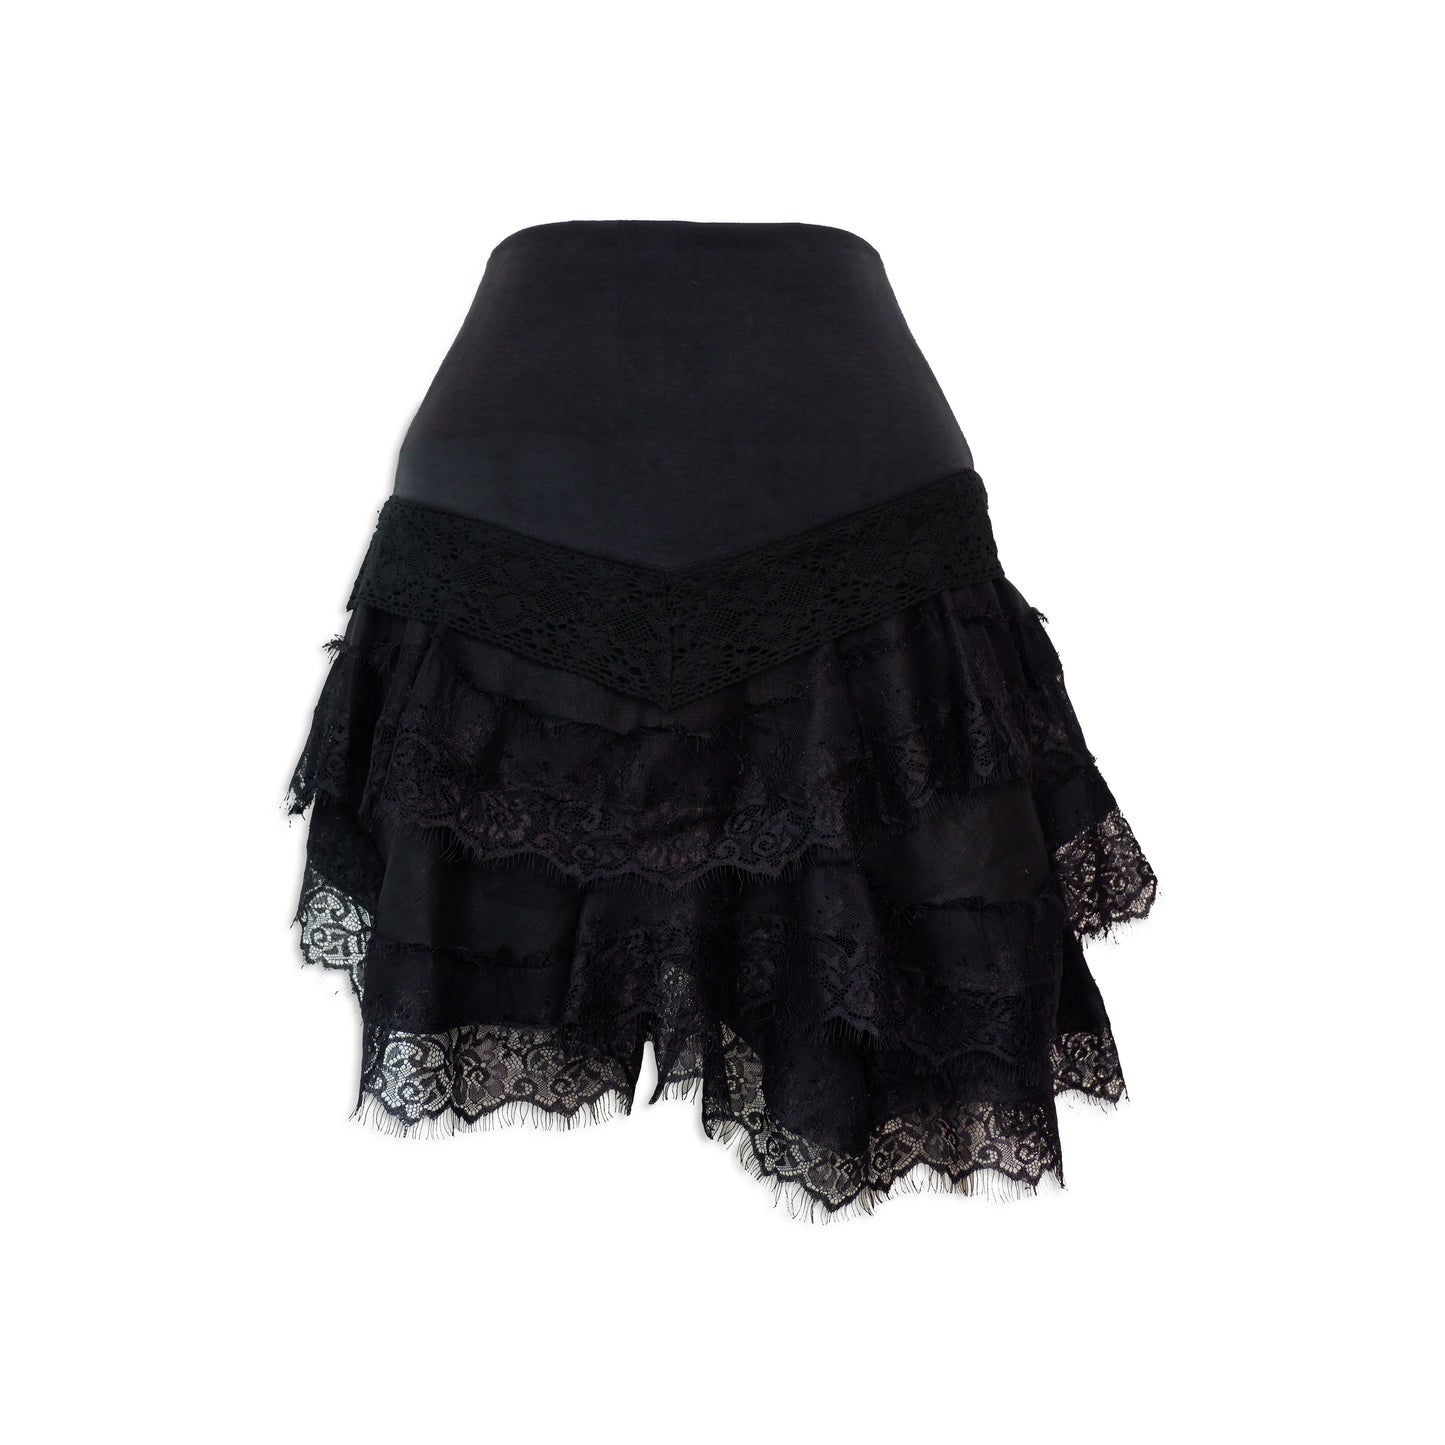 Black Modal and Lace Skirt Sculpting Waistband